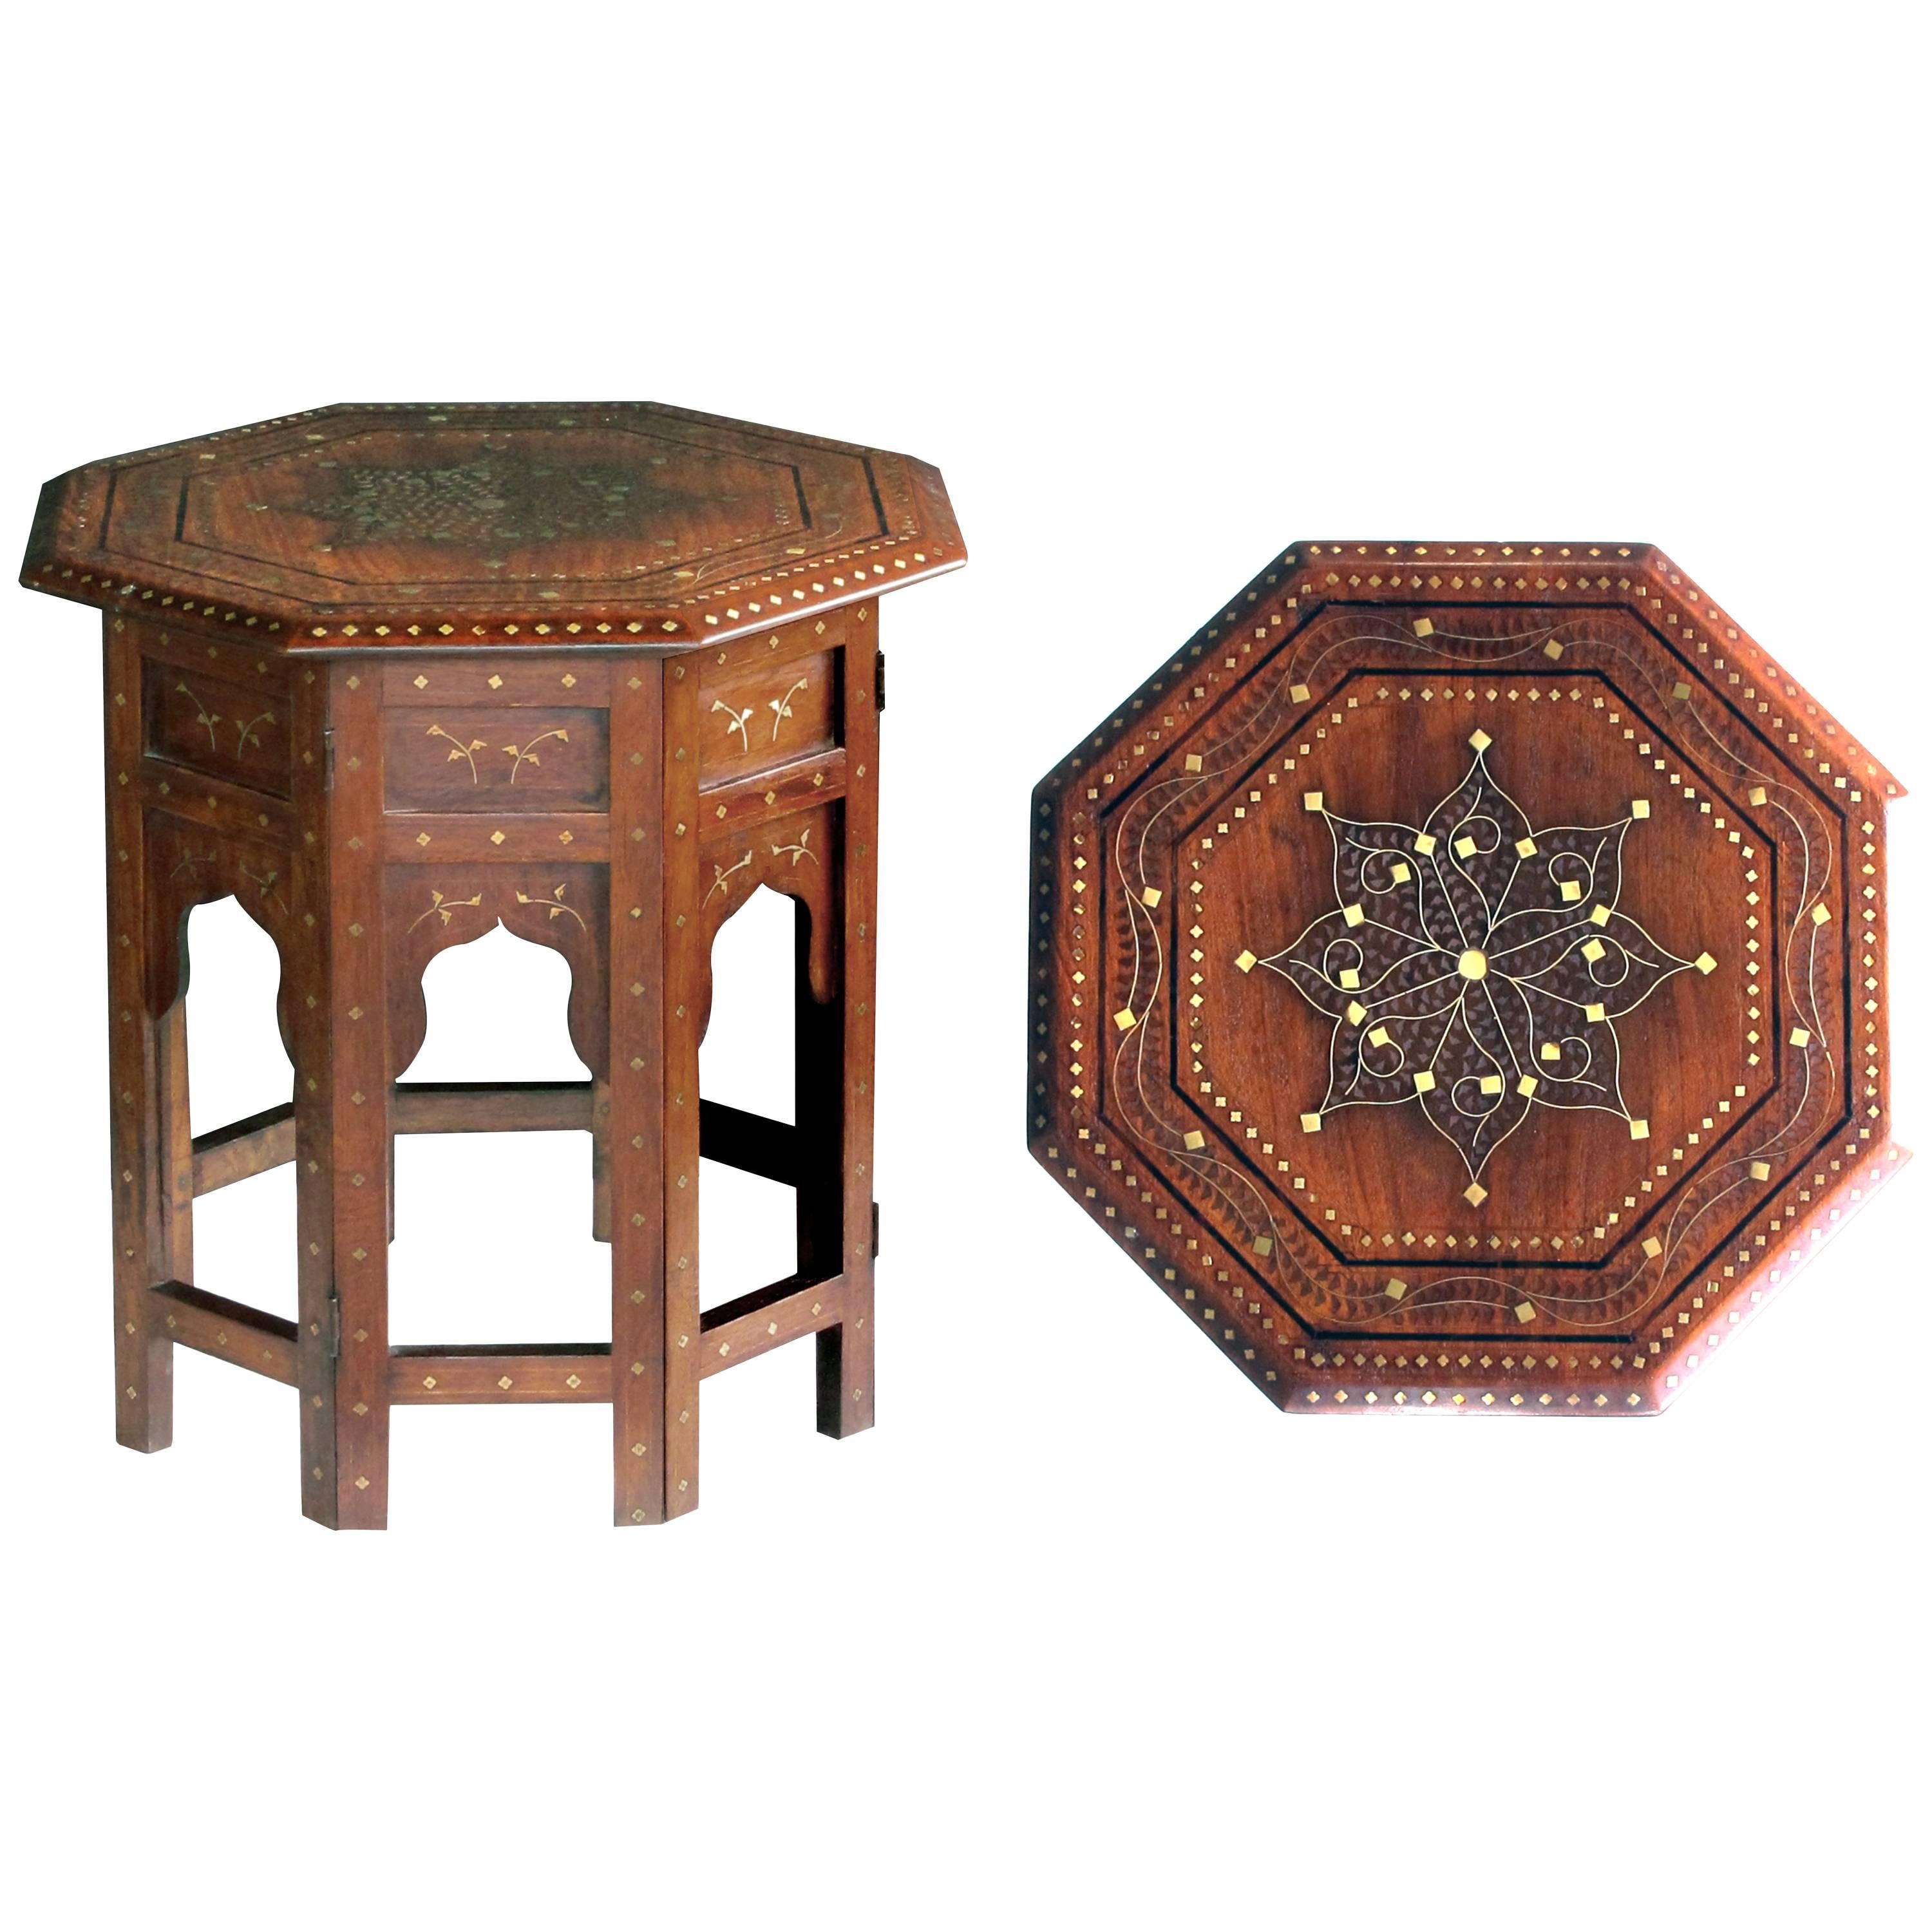 Detailed Brass and Pewter Inlaid Octagonal Anglo-Indian Traveling Table